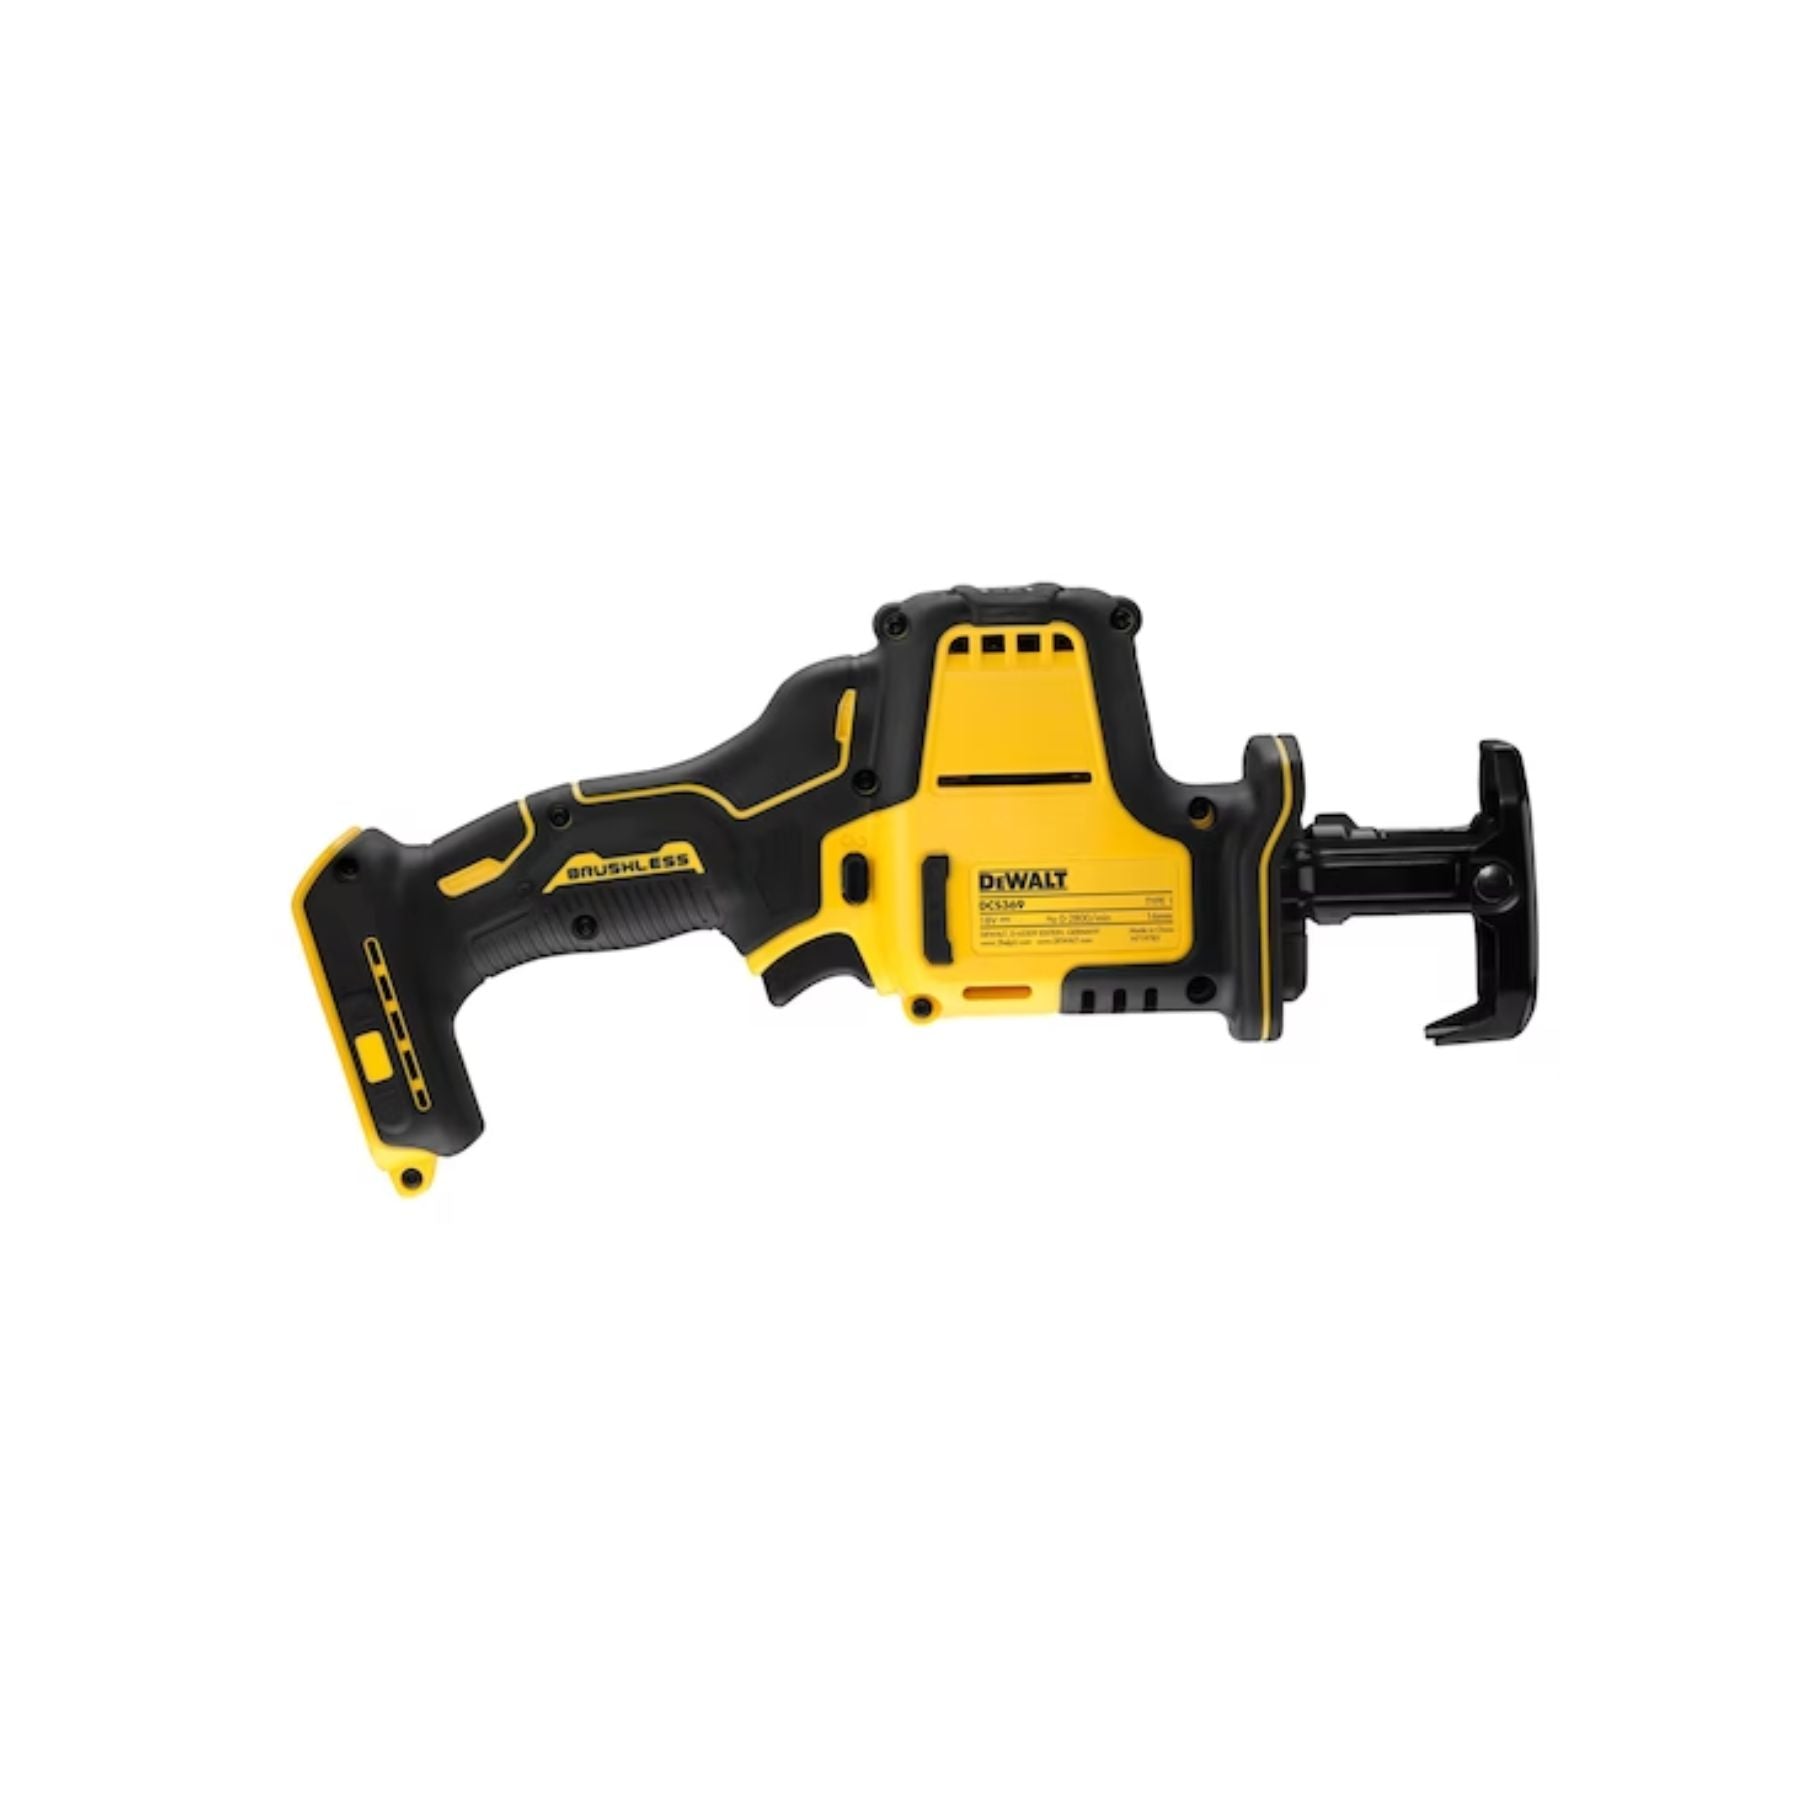 Dewalt (DCS369N) Brushless One Handed Reciprocating Saw - Bare Tool